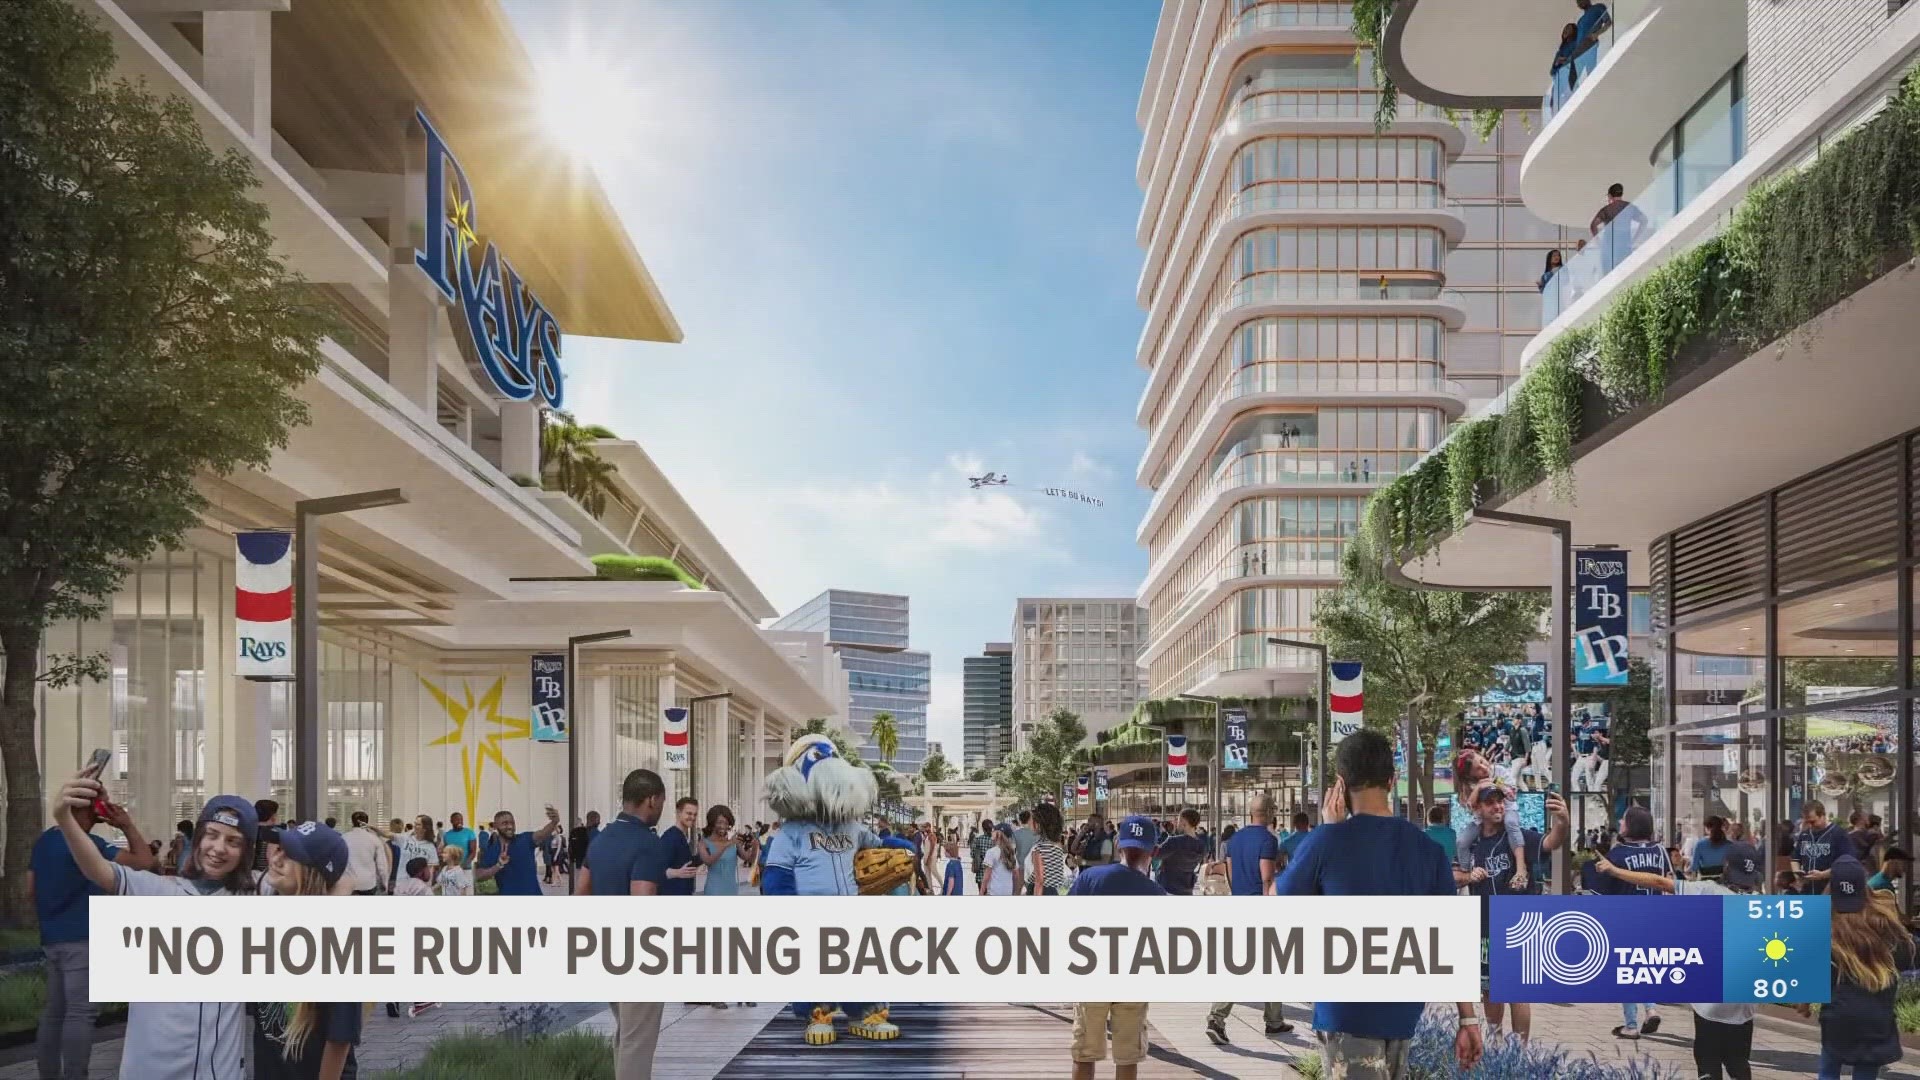 The proposal calls for St. Pete and Pinellas County to pay roughly $600 million. The city would also sell the land around the stadium for more than $100 million.